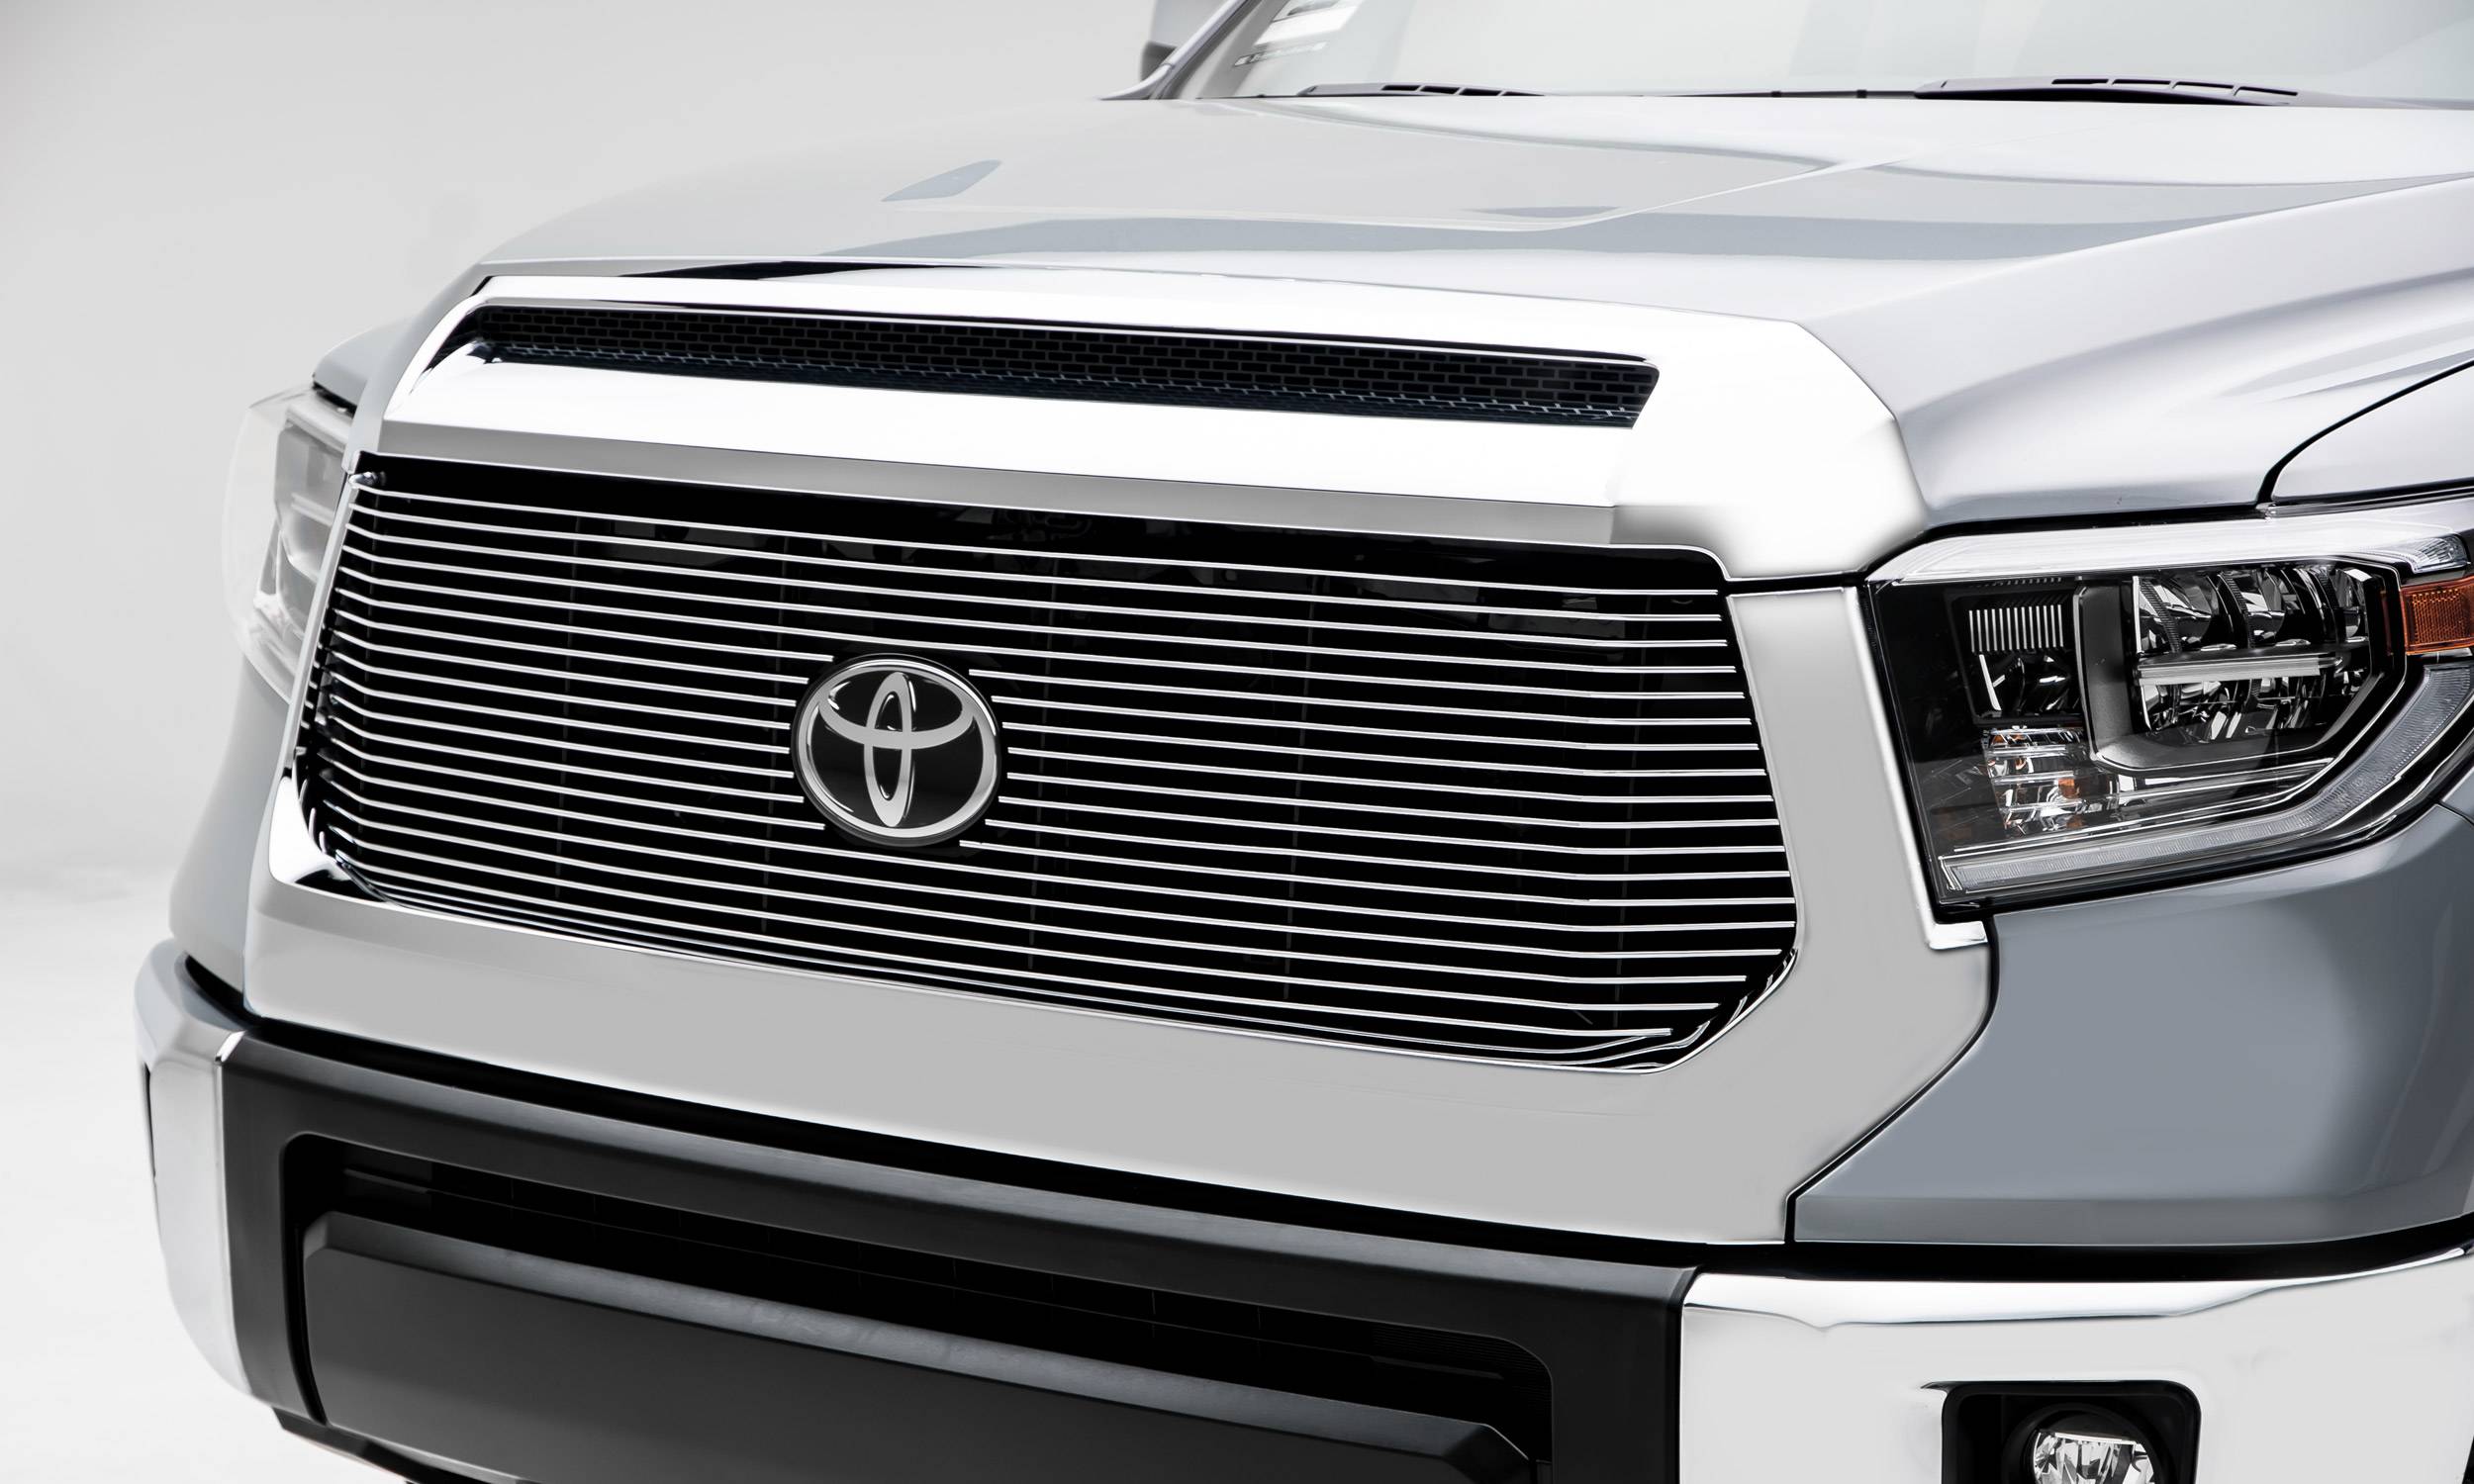 T-REX Grilles - 2018-2021 Tundra Billet Grille, Polished, 1 Pc, Replacement, Does Not Fit Vehicles with Camera - Part # 20966